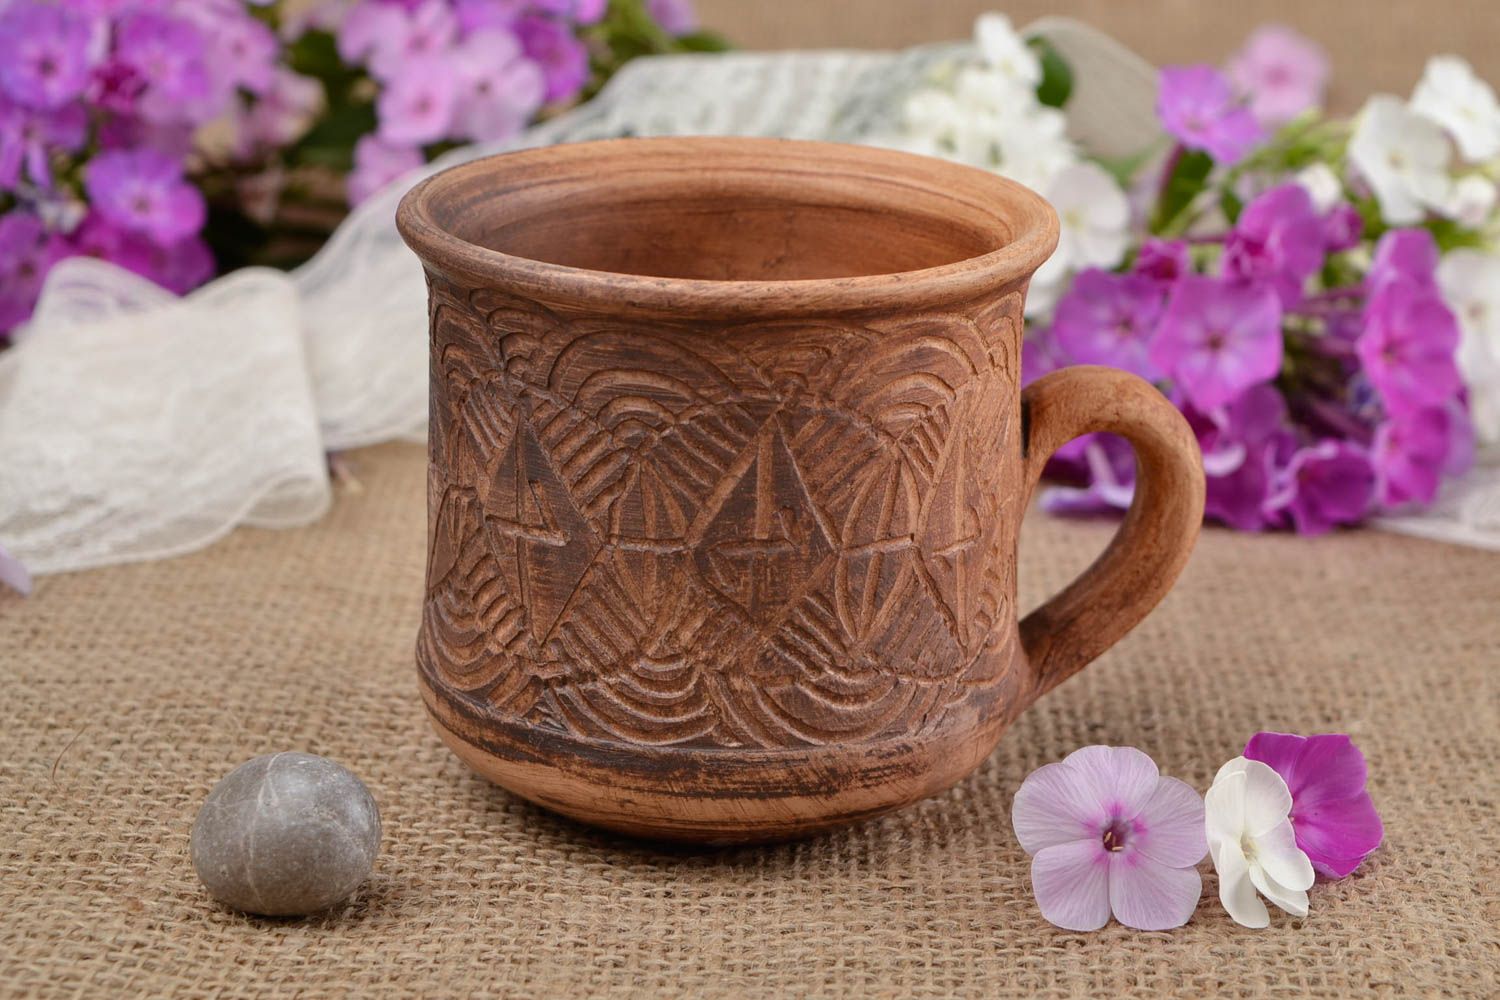 Medium size 5 oz clay cup with handle and rustic pattern photo 1